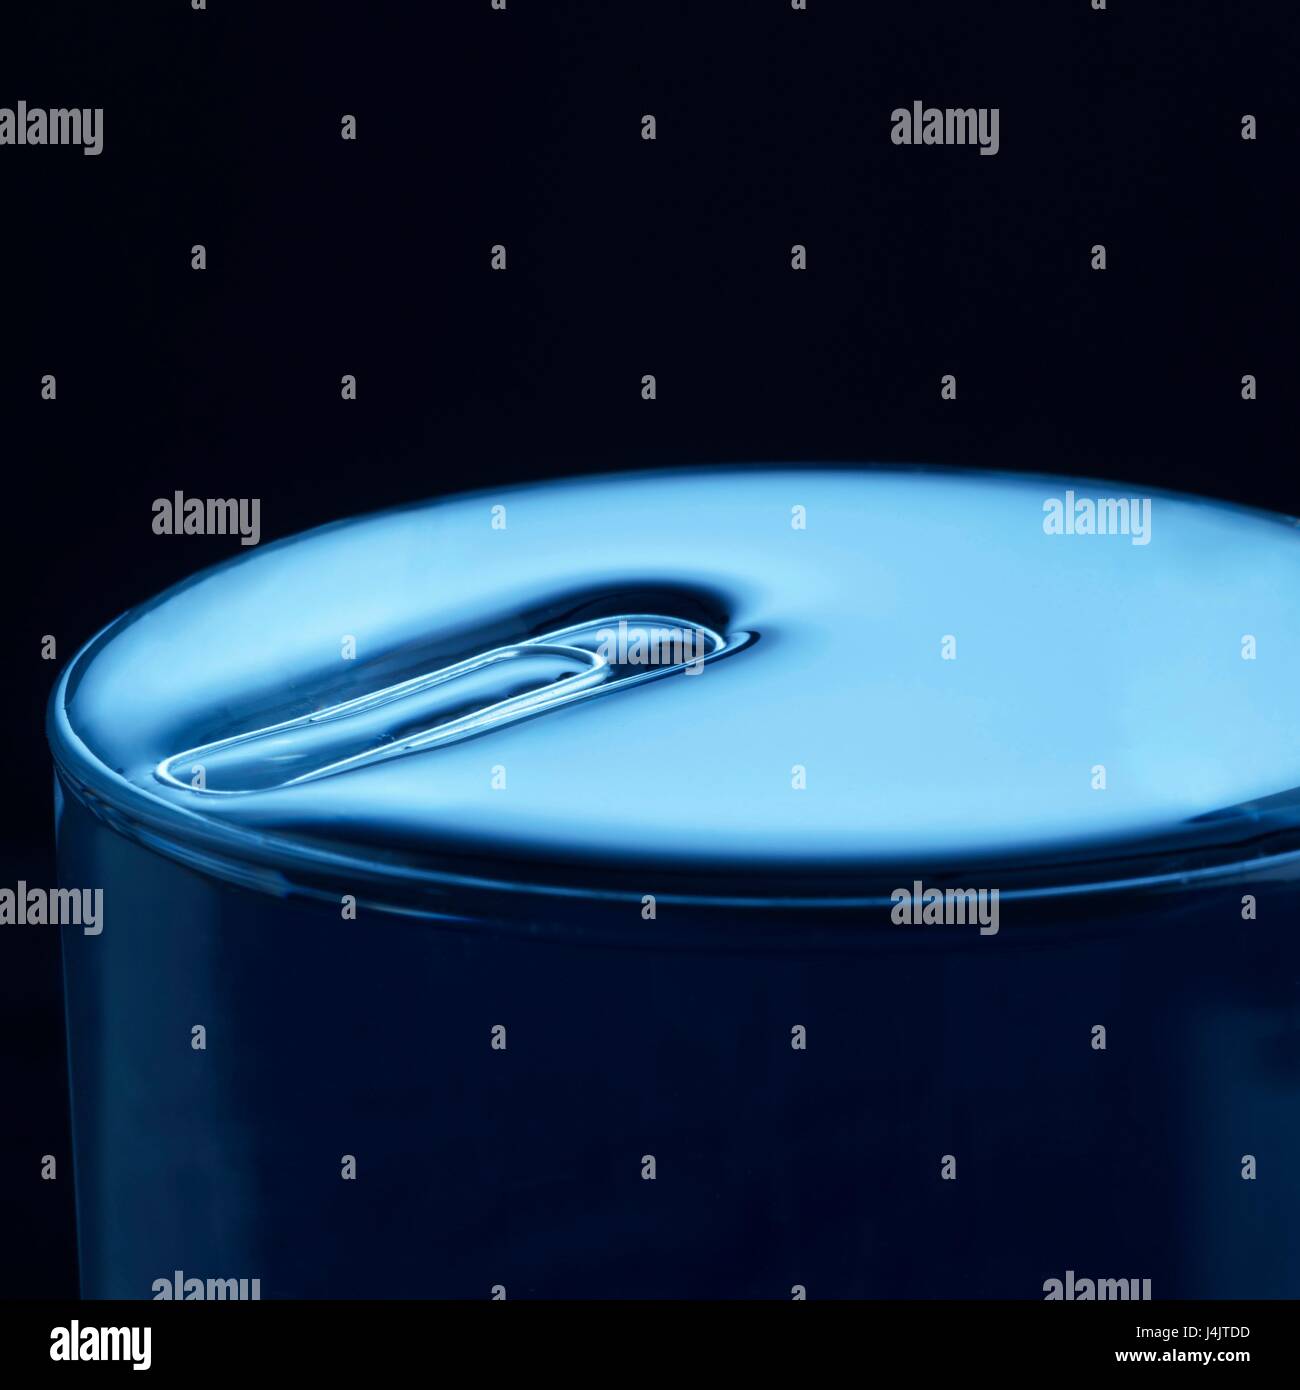 Paperclip floating on water in a glass, studio shot. Stock Photo